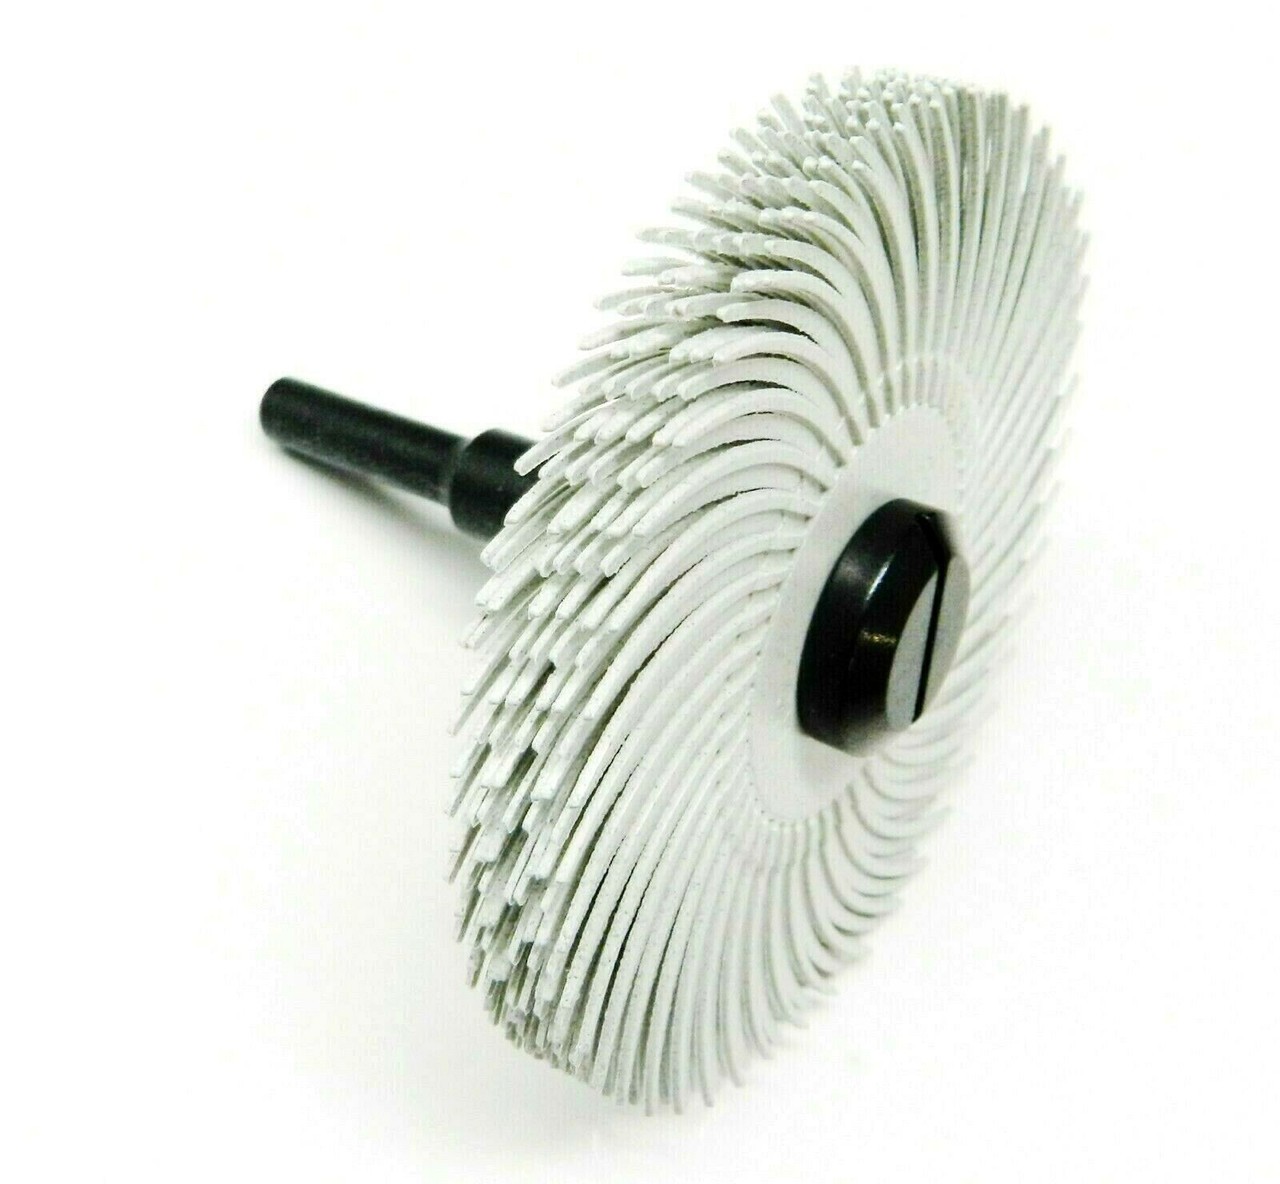 3m Radial Bristle Disc 3" 120 Grit White with 1/4" Mandrel 6 Brushes and Arbor Set